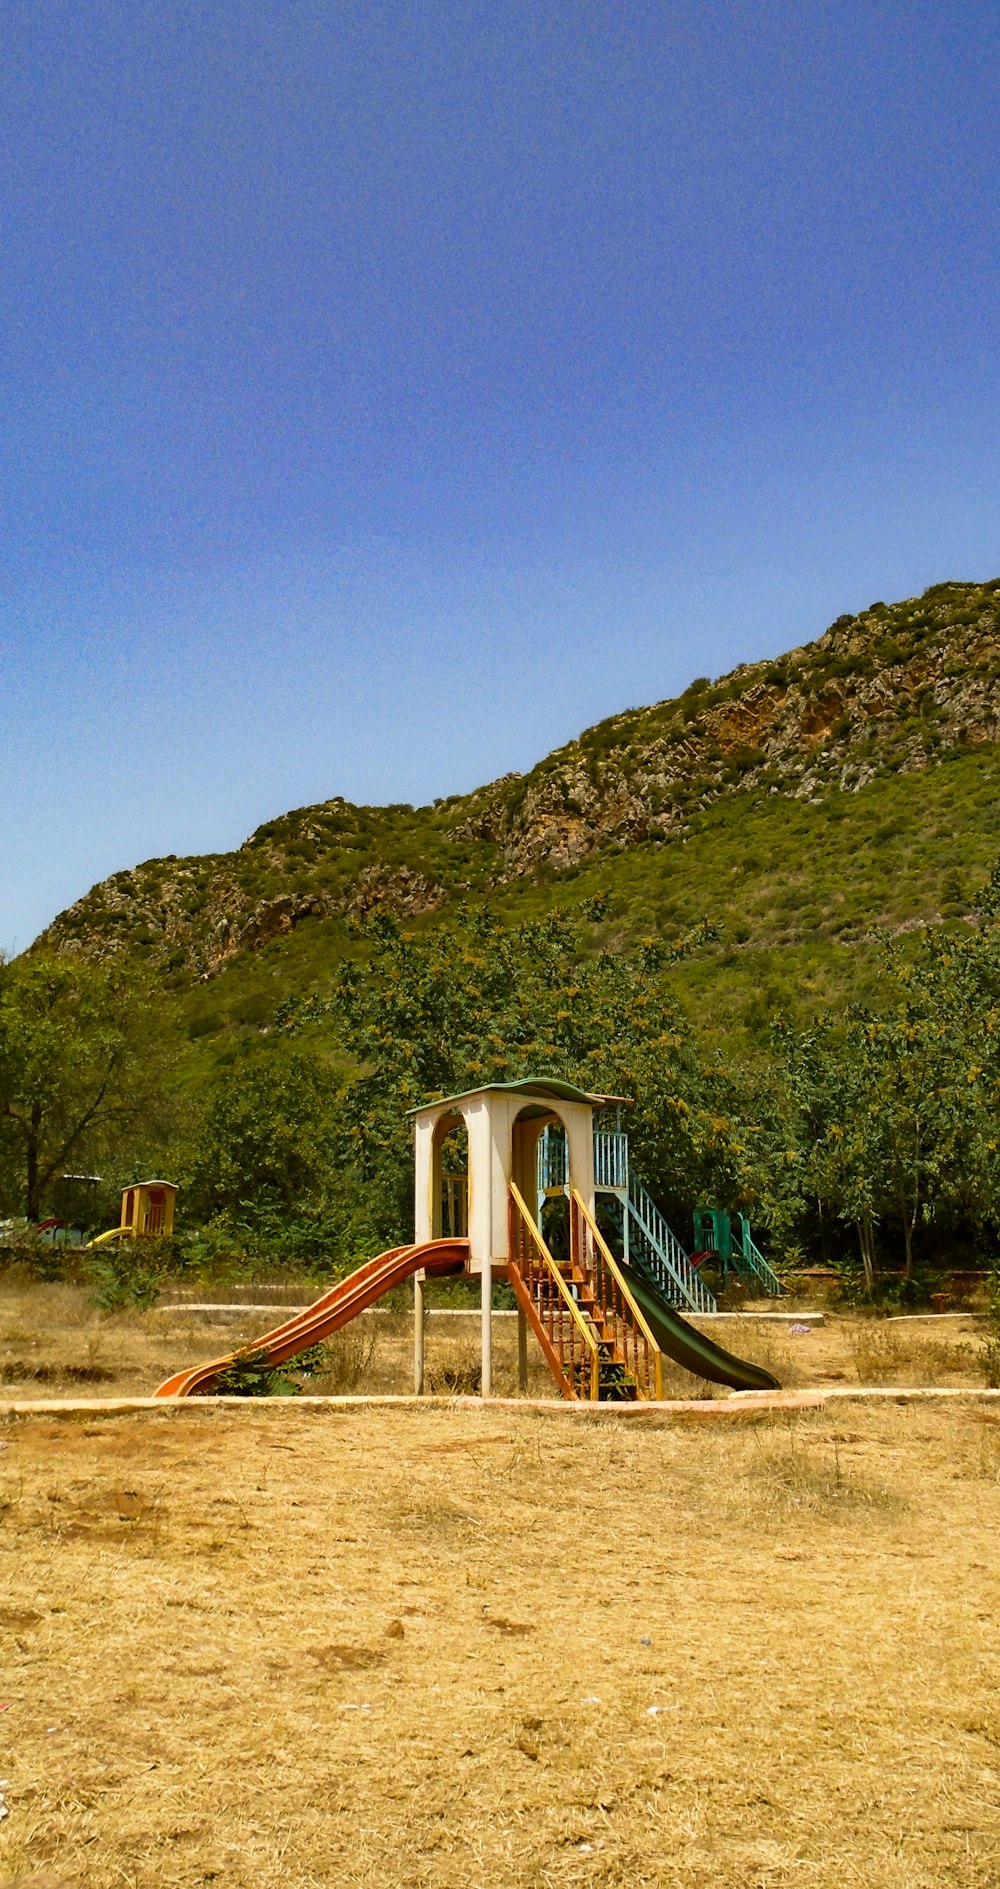 blue and brown wooden playground near green mountain under blue sky during daytime